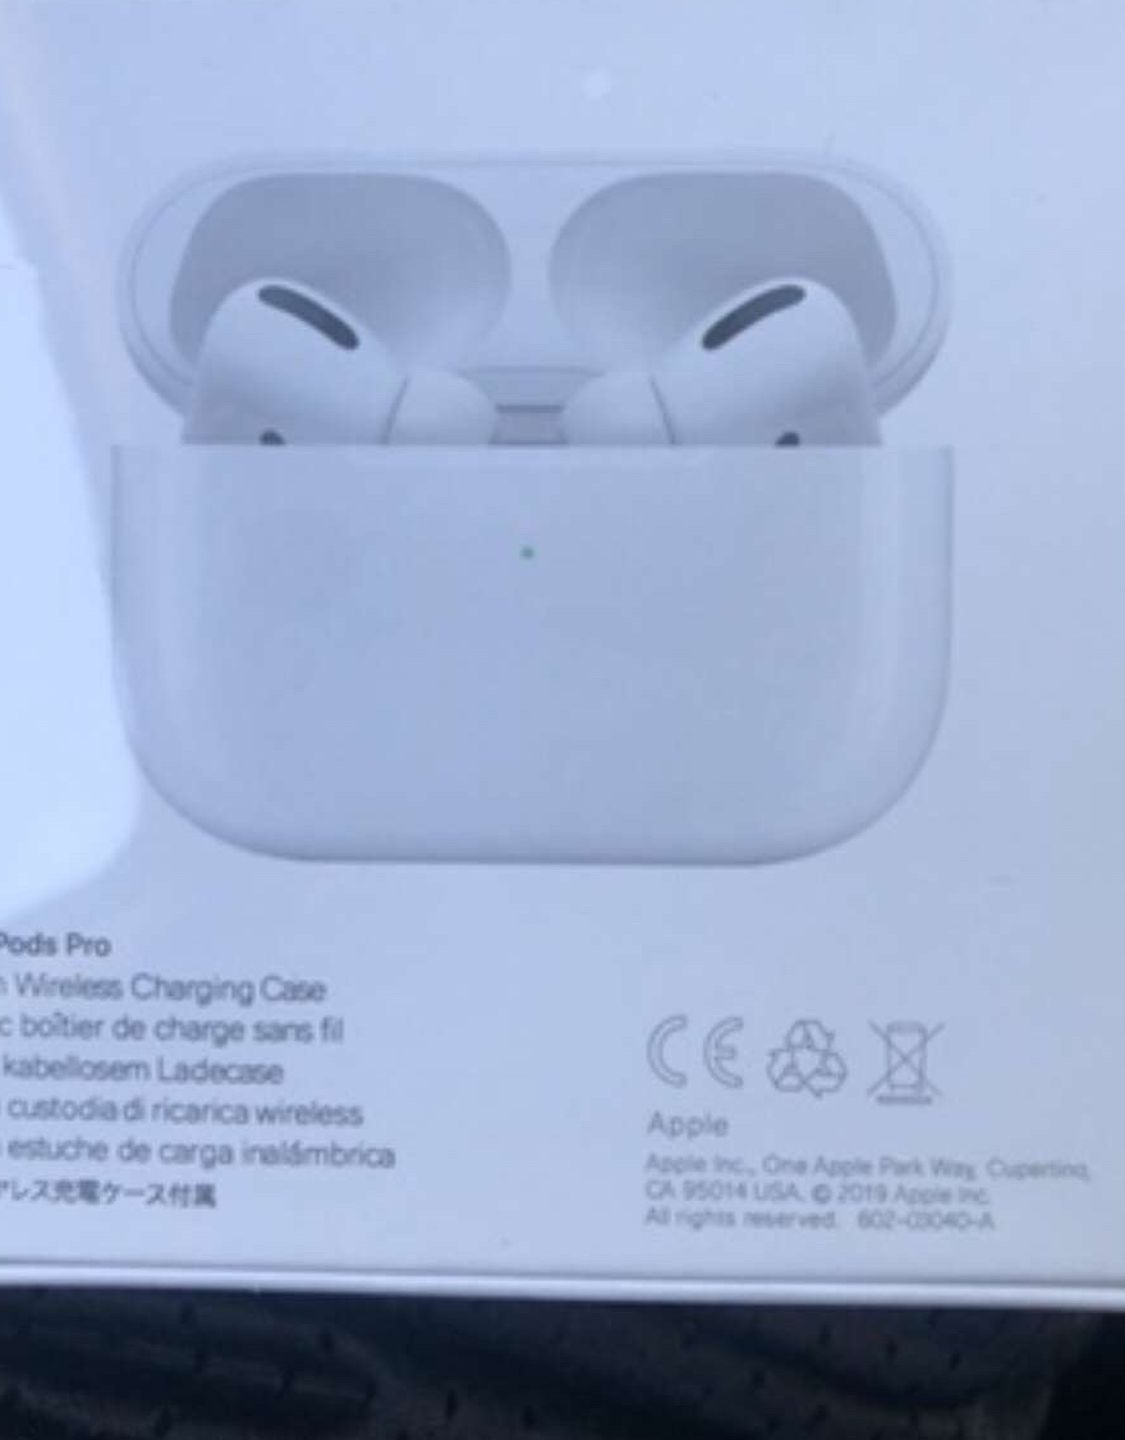 Air pods Pro - $130